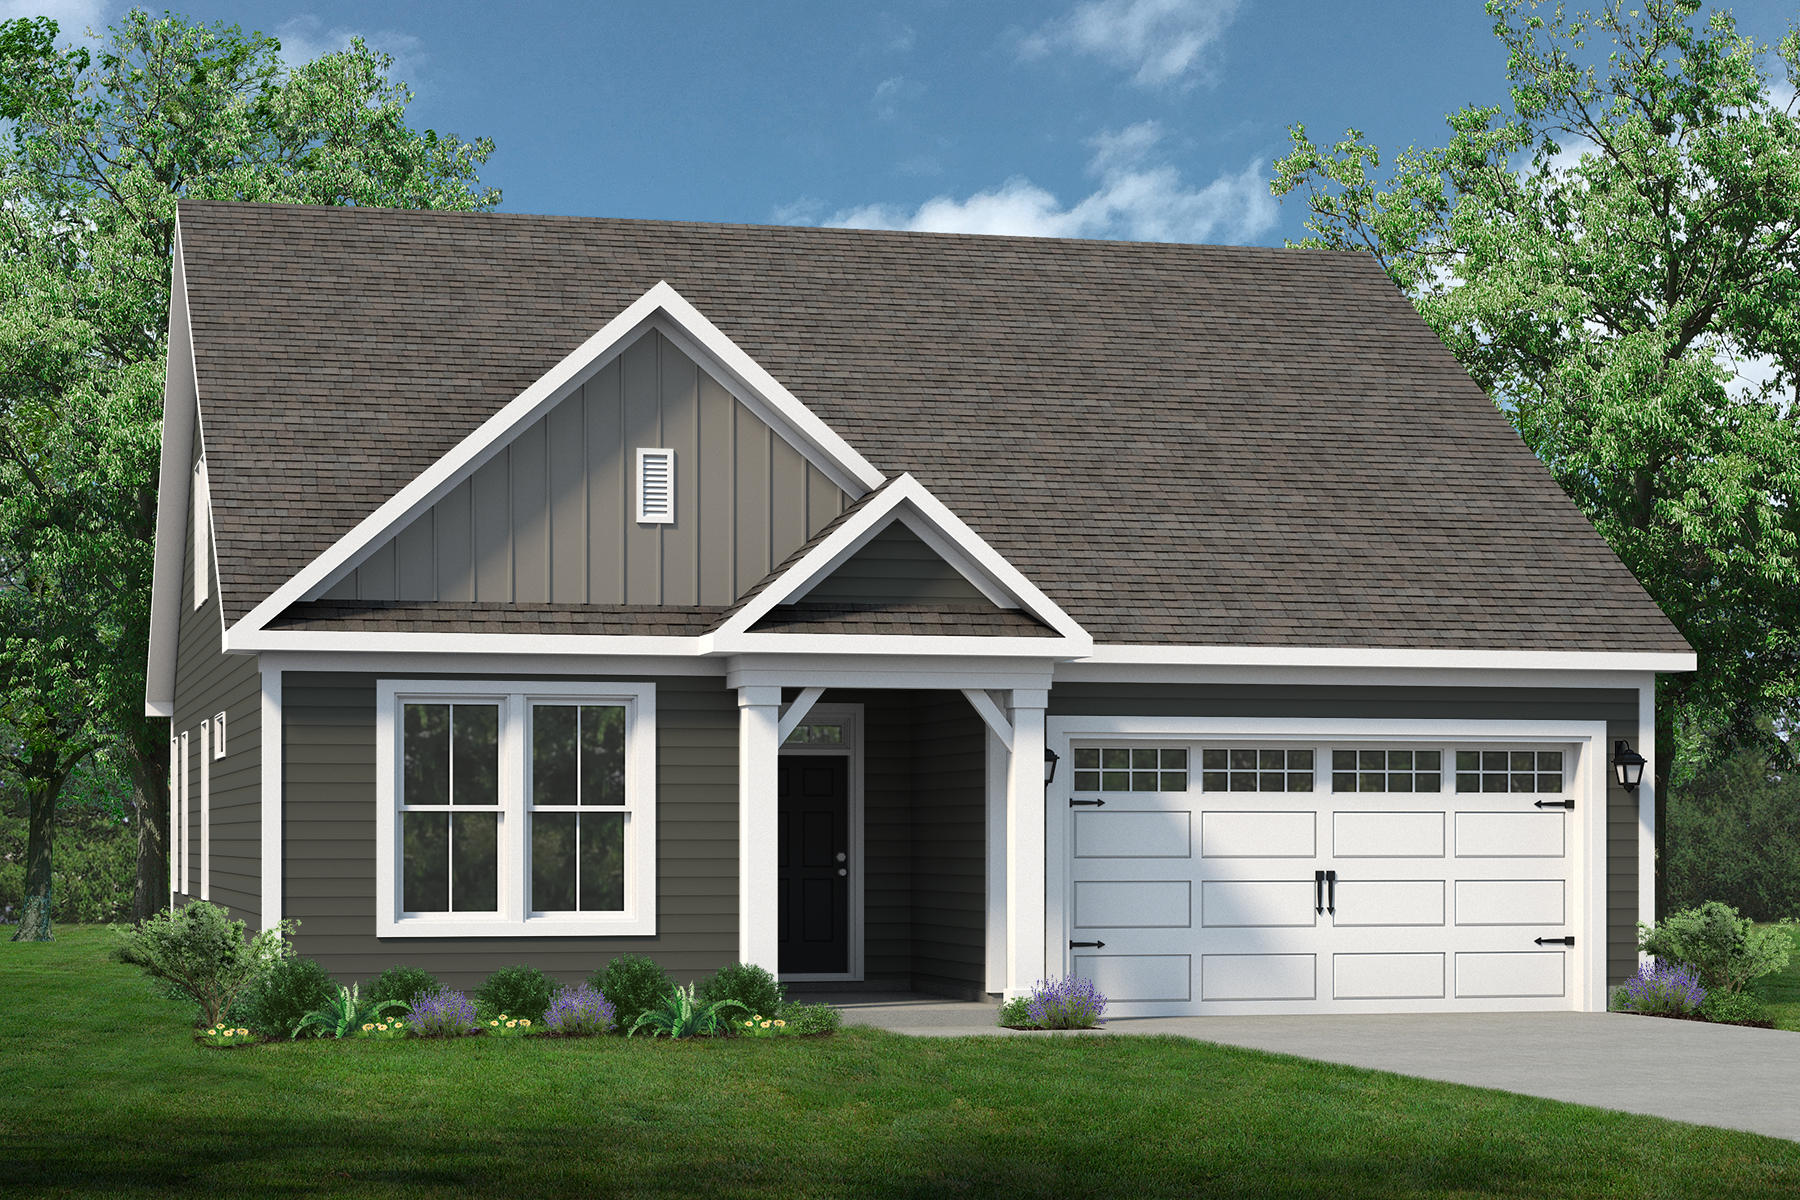 Elevation B. 1,938sf New Home in Bolivia, NC